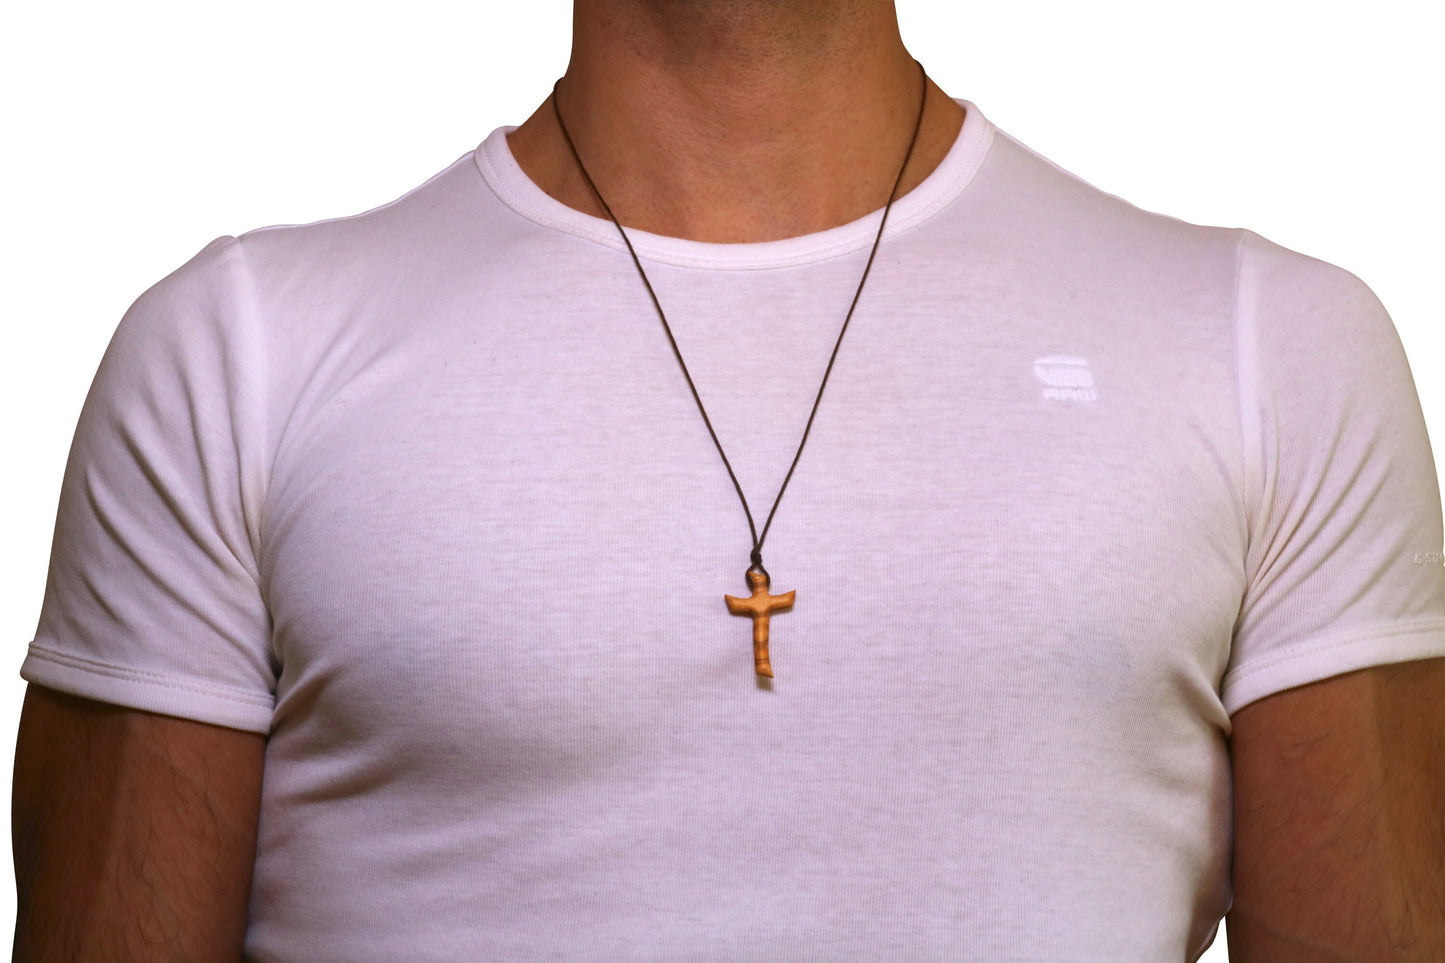 Charming olive wood cross necklace handmade in Nazareth For Men